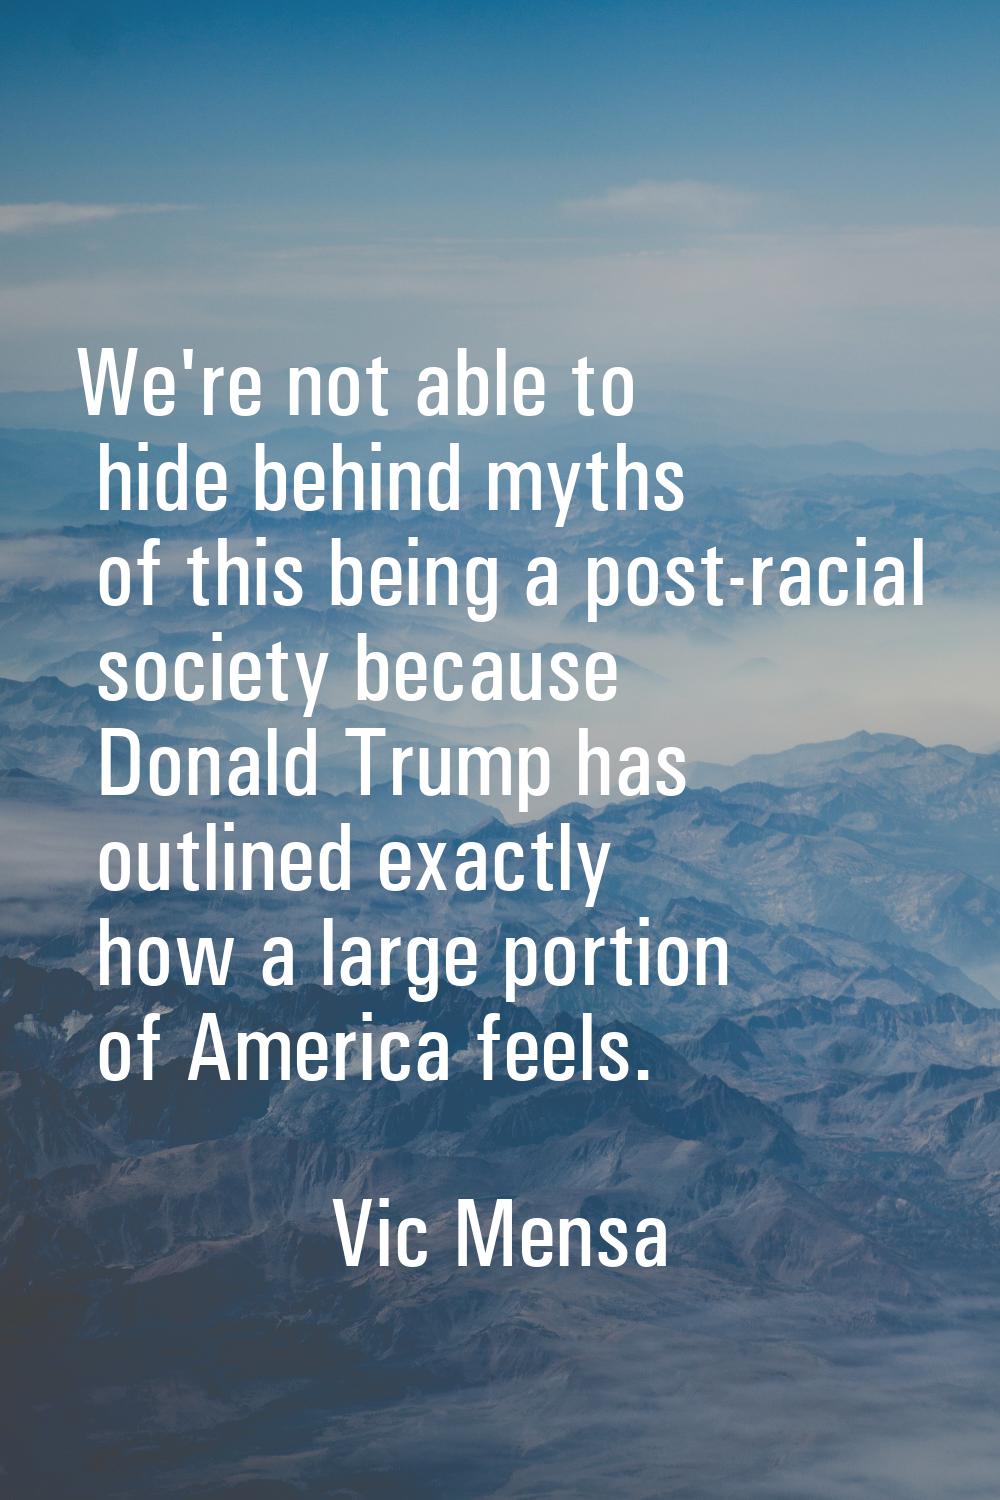 We're not able to hide behind myths of this being a post-racial society because Donald Trump has ou